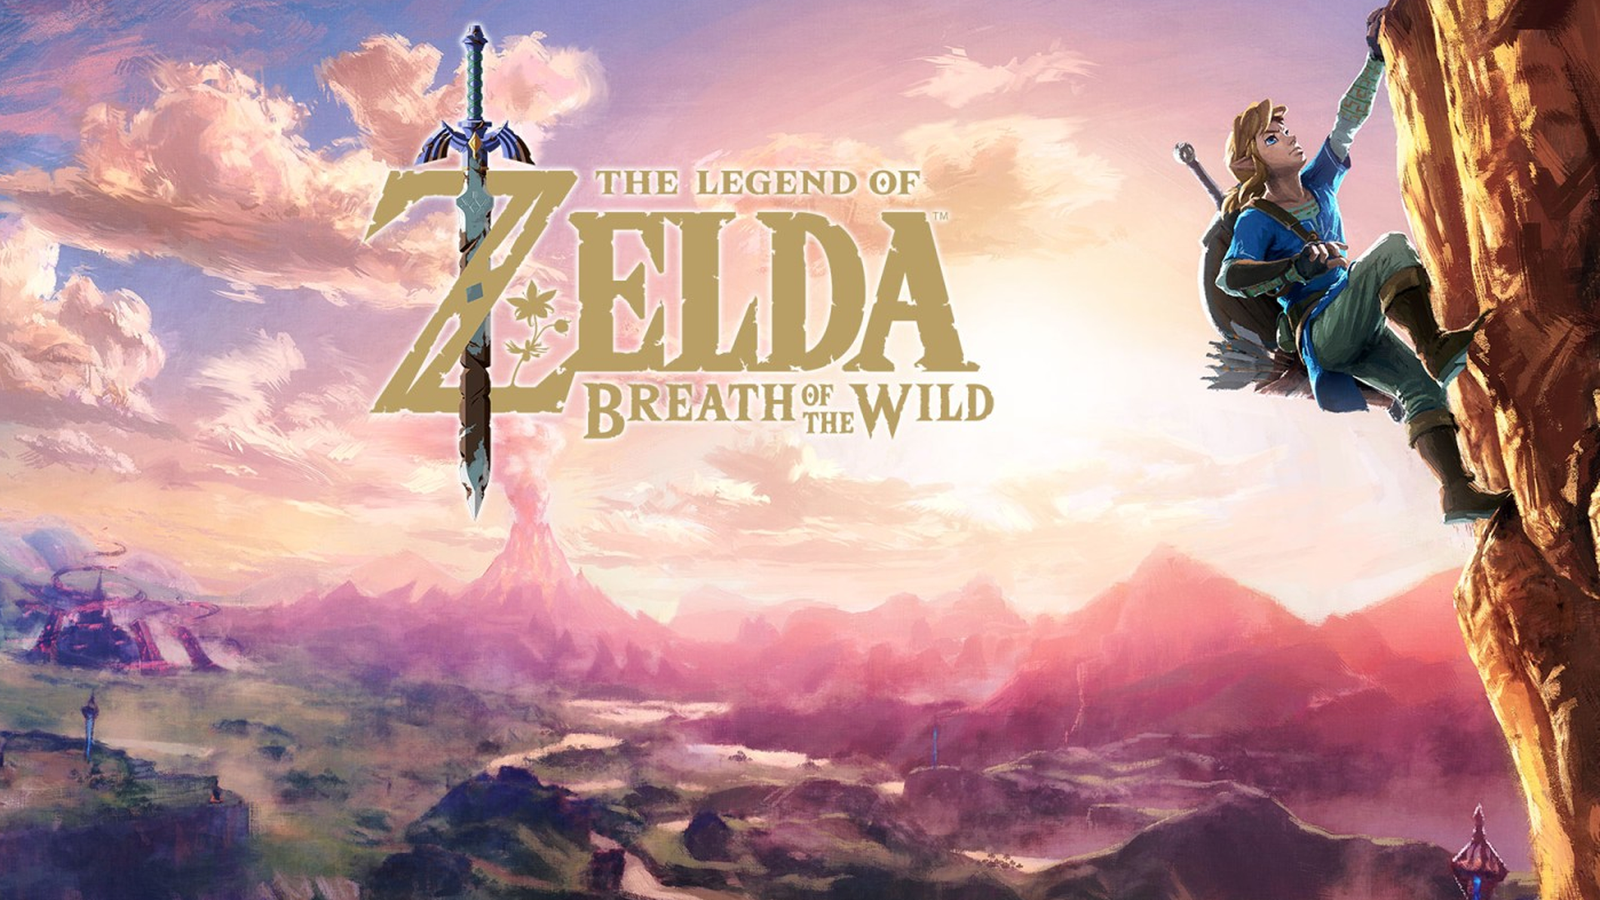 Save £18 on My Nintendo at Wild digital of of Legend Zelda: copy a of The Store Breath the